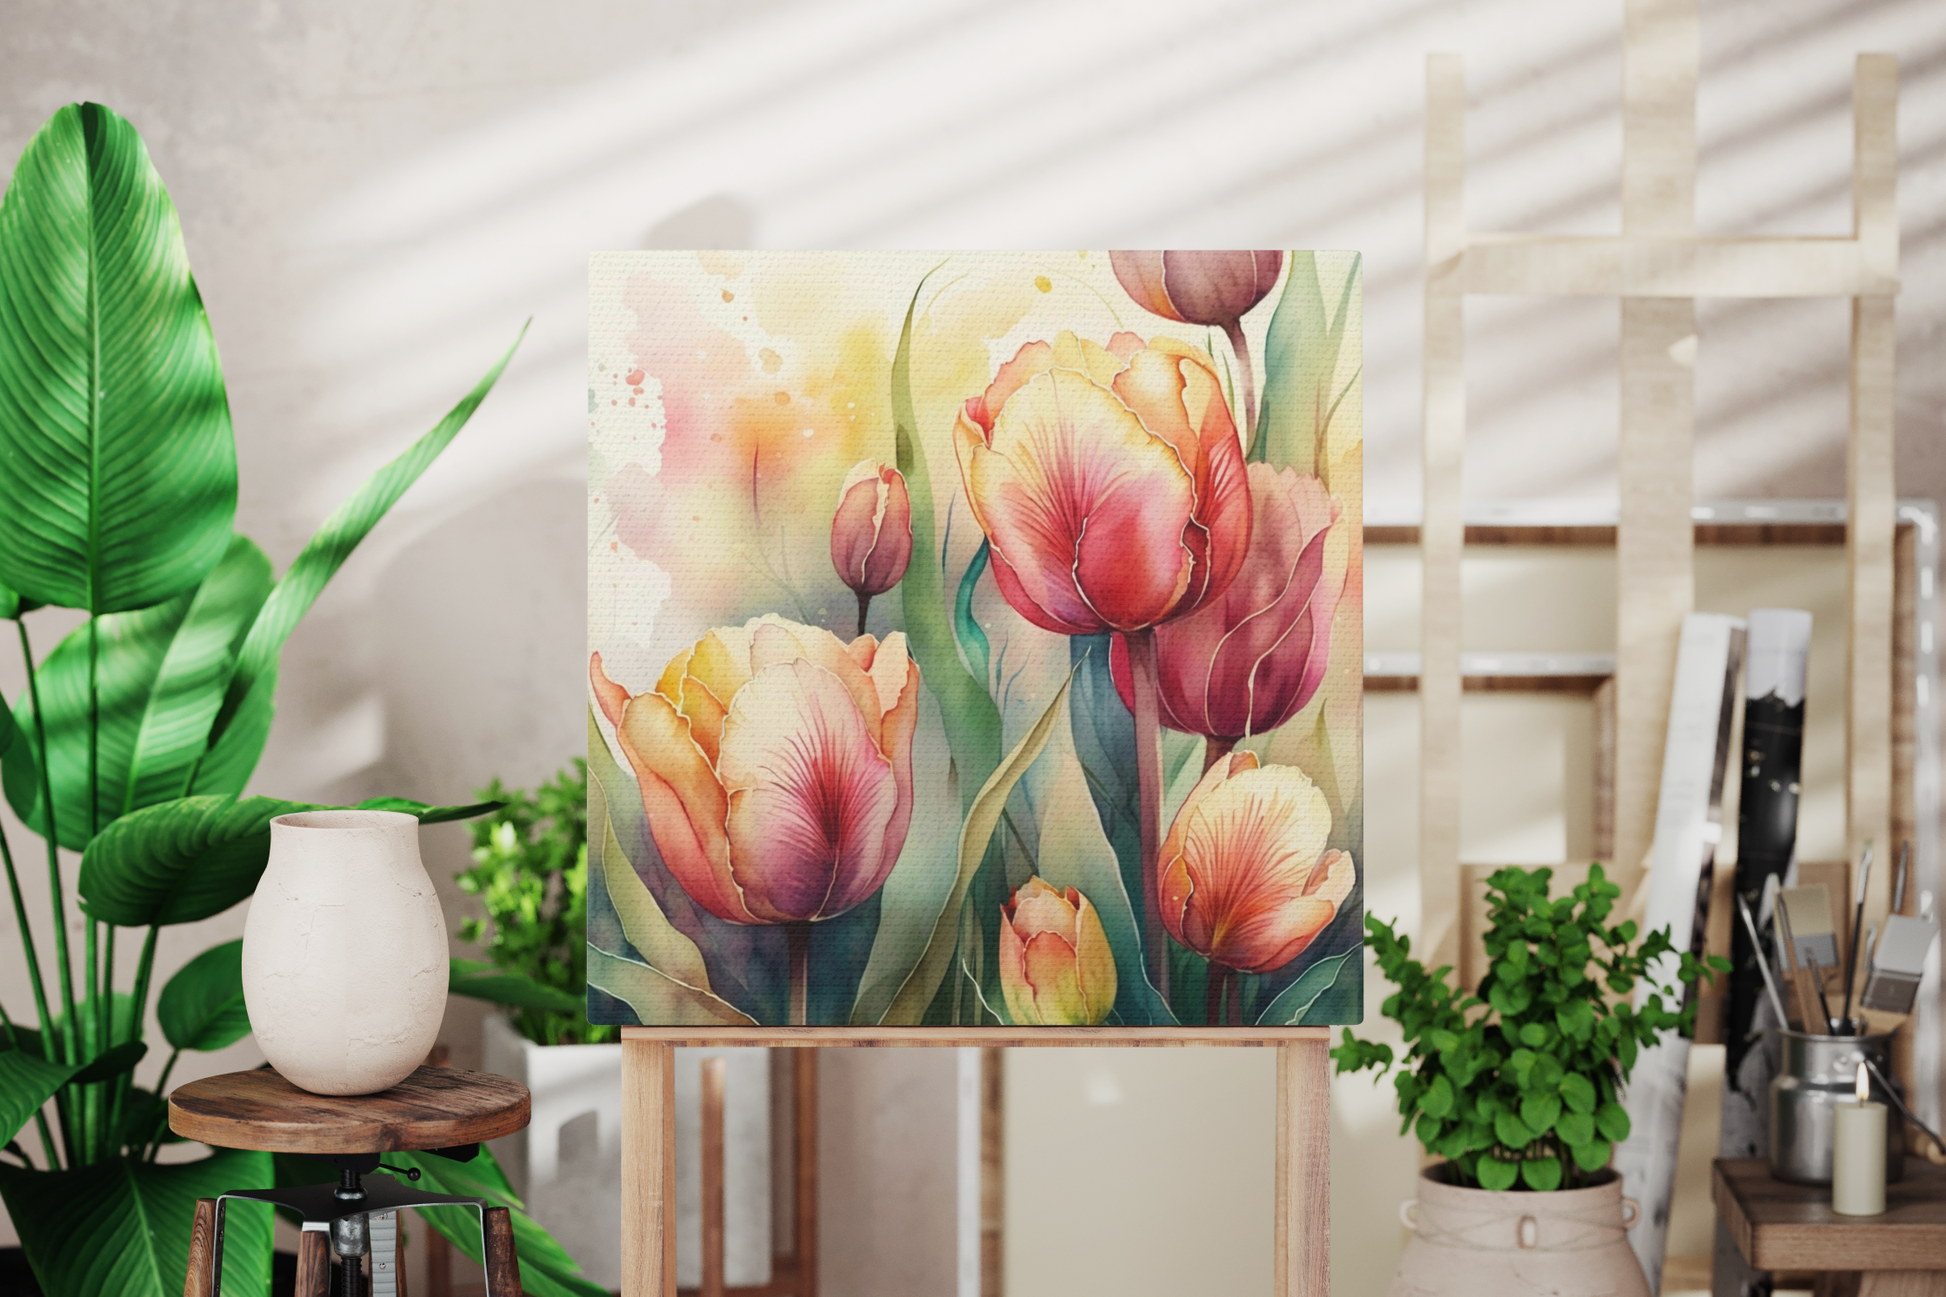 tulips in a garden art print, red and yellow tulip design on canvas, watercolor tulip wall art, tulip decor, floral wall hanging